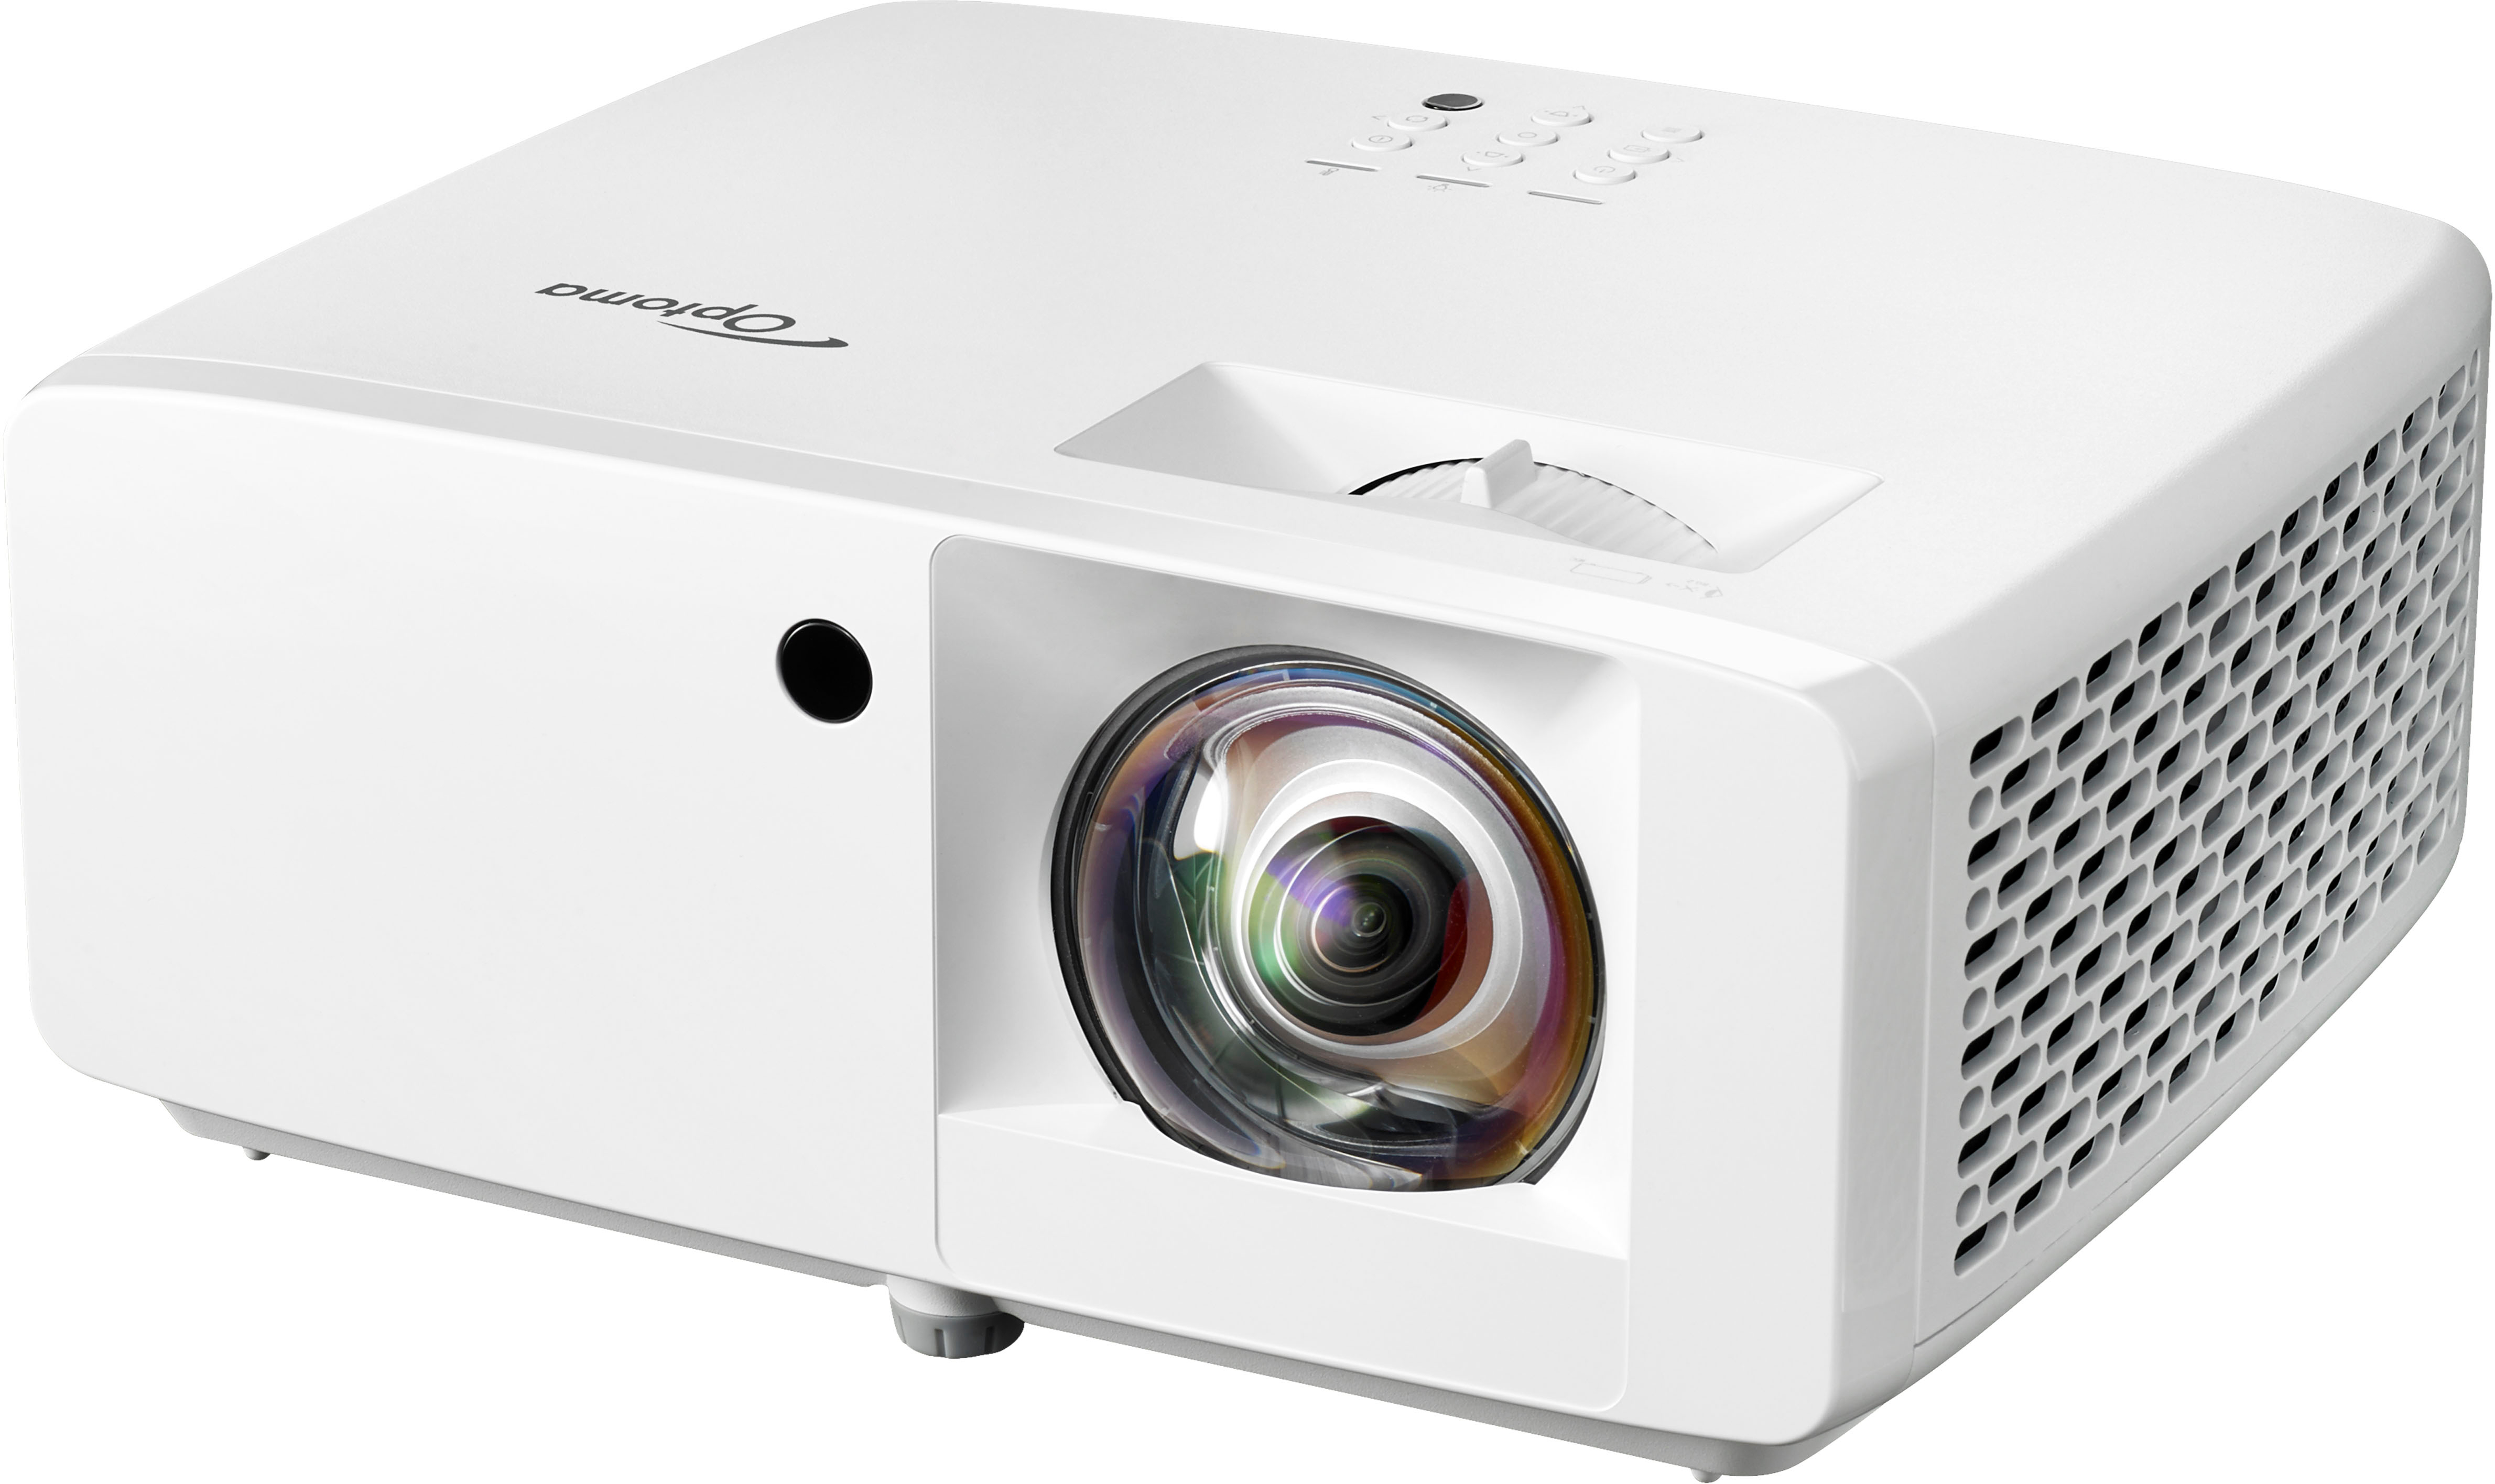 Angle View: ViewSonic - PG706WU 4000 Lumens WUXGA Projector with RJ45 LAN Control, Vertical Keystone and Optical Zoom - White